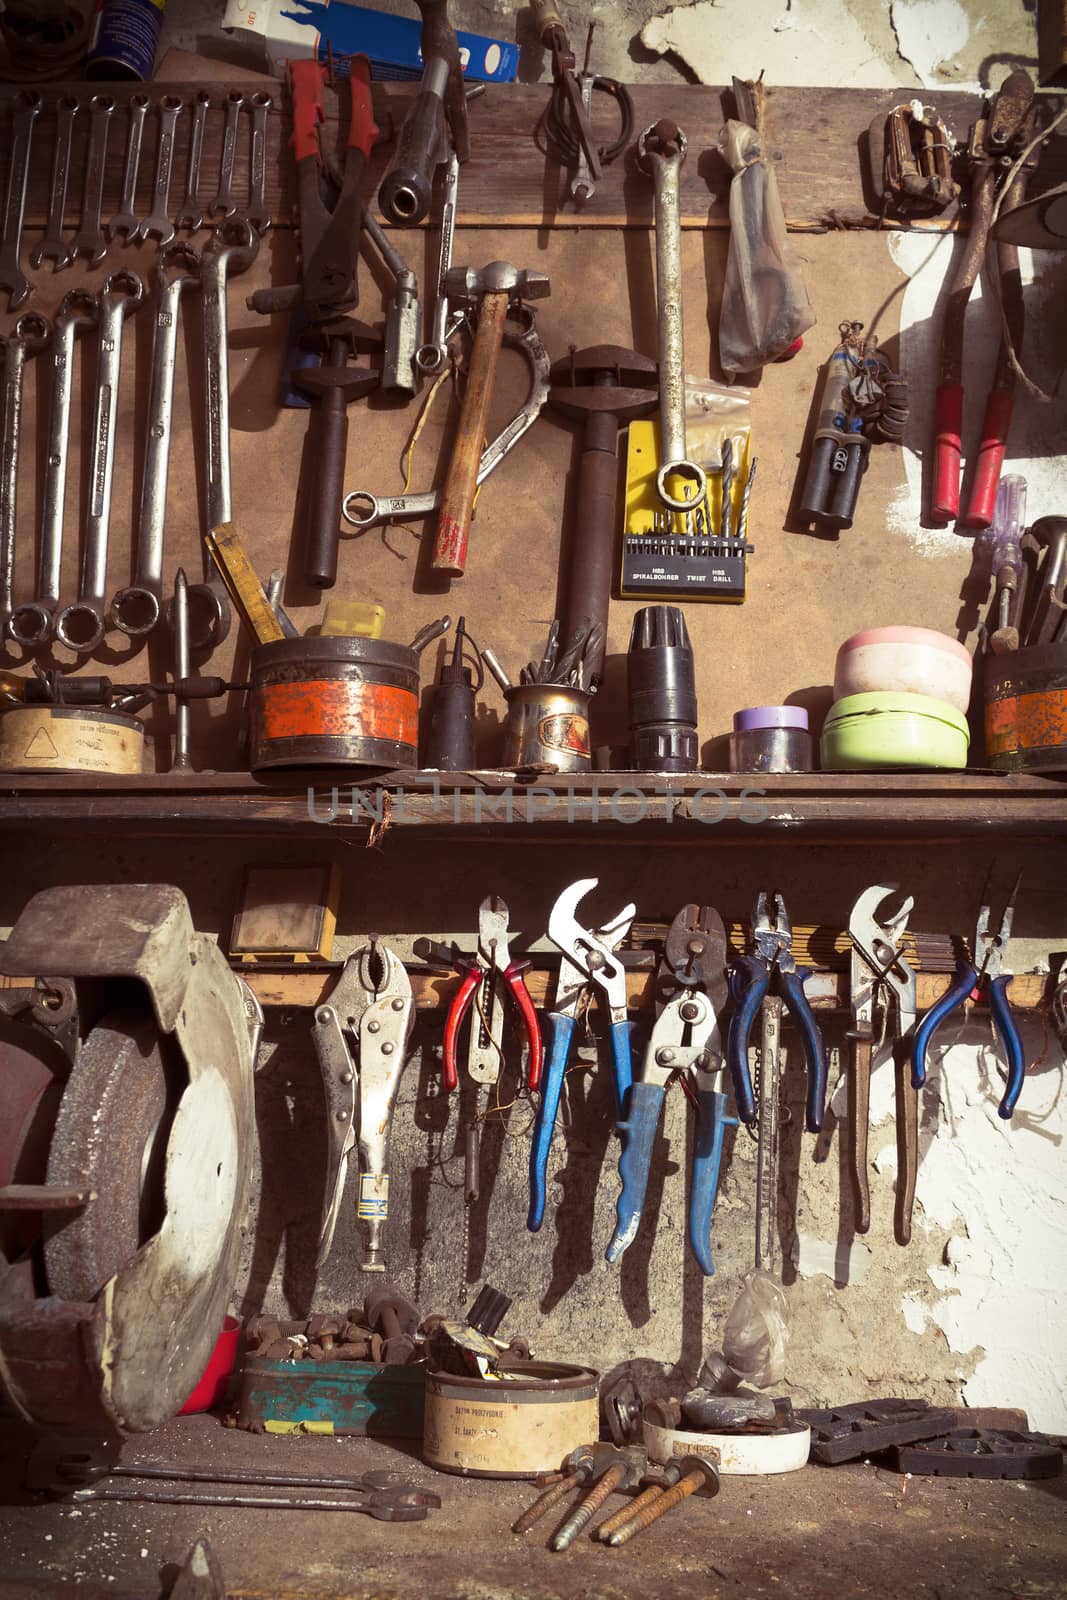 Tools in an old home workshop